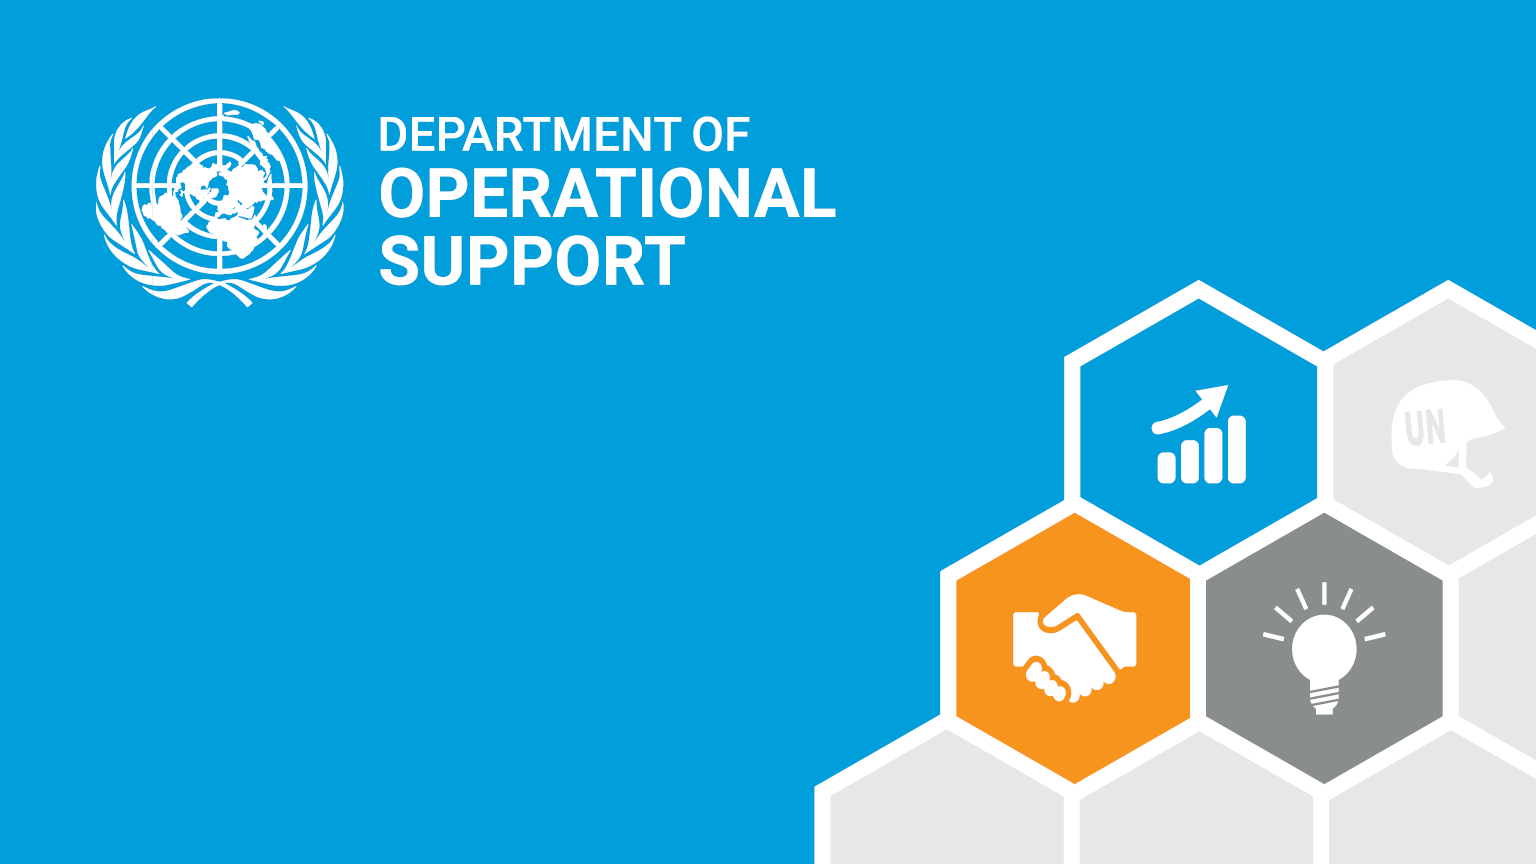 Operations support. Фон саппорт. Support Hub картинка. Un background. Support hub